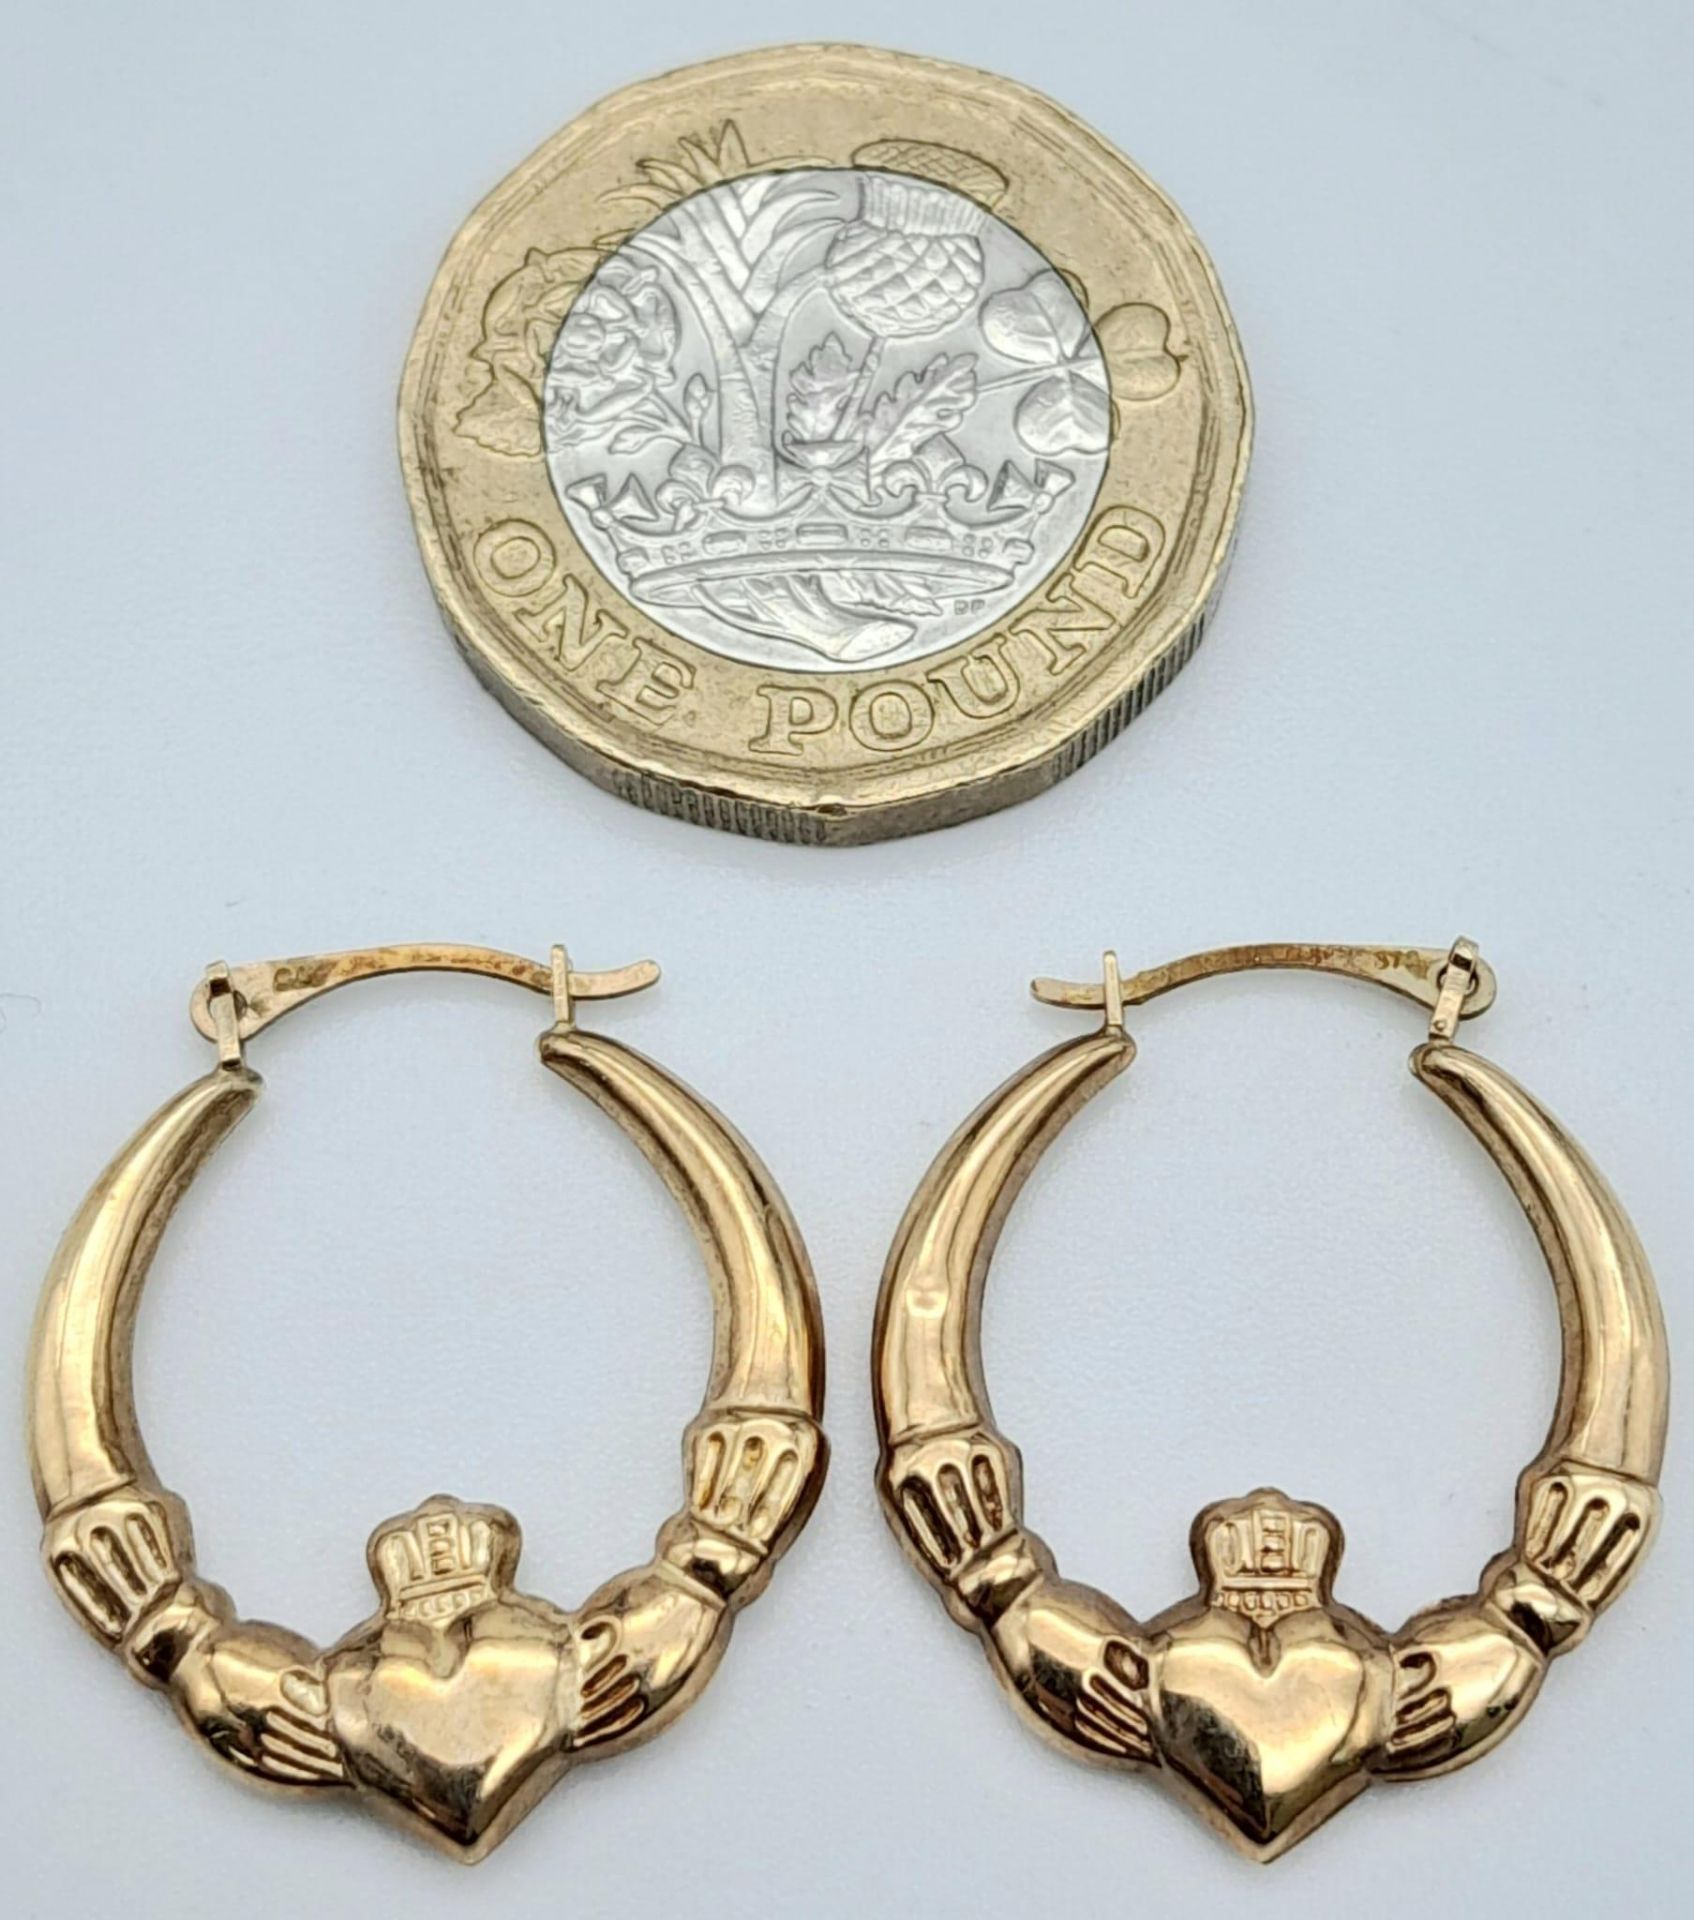 A 9K YELLOW GOLD CLADDAGH CREOLE HOOP EARRINGS 1G 2.4CM X 2CM A/S 2009 - Image 3 of 4